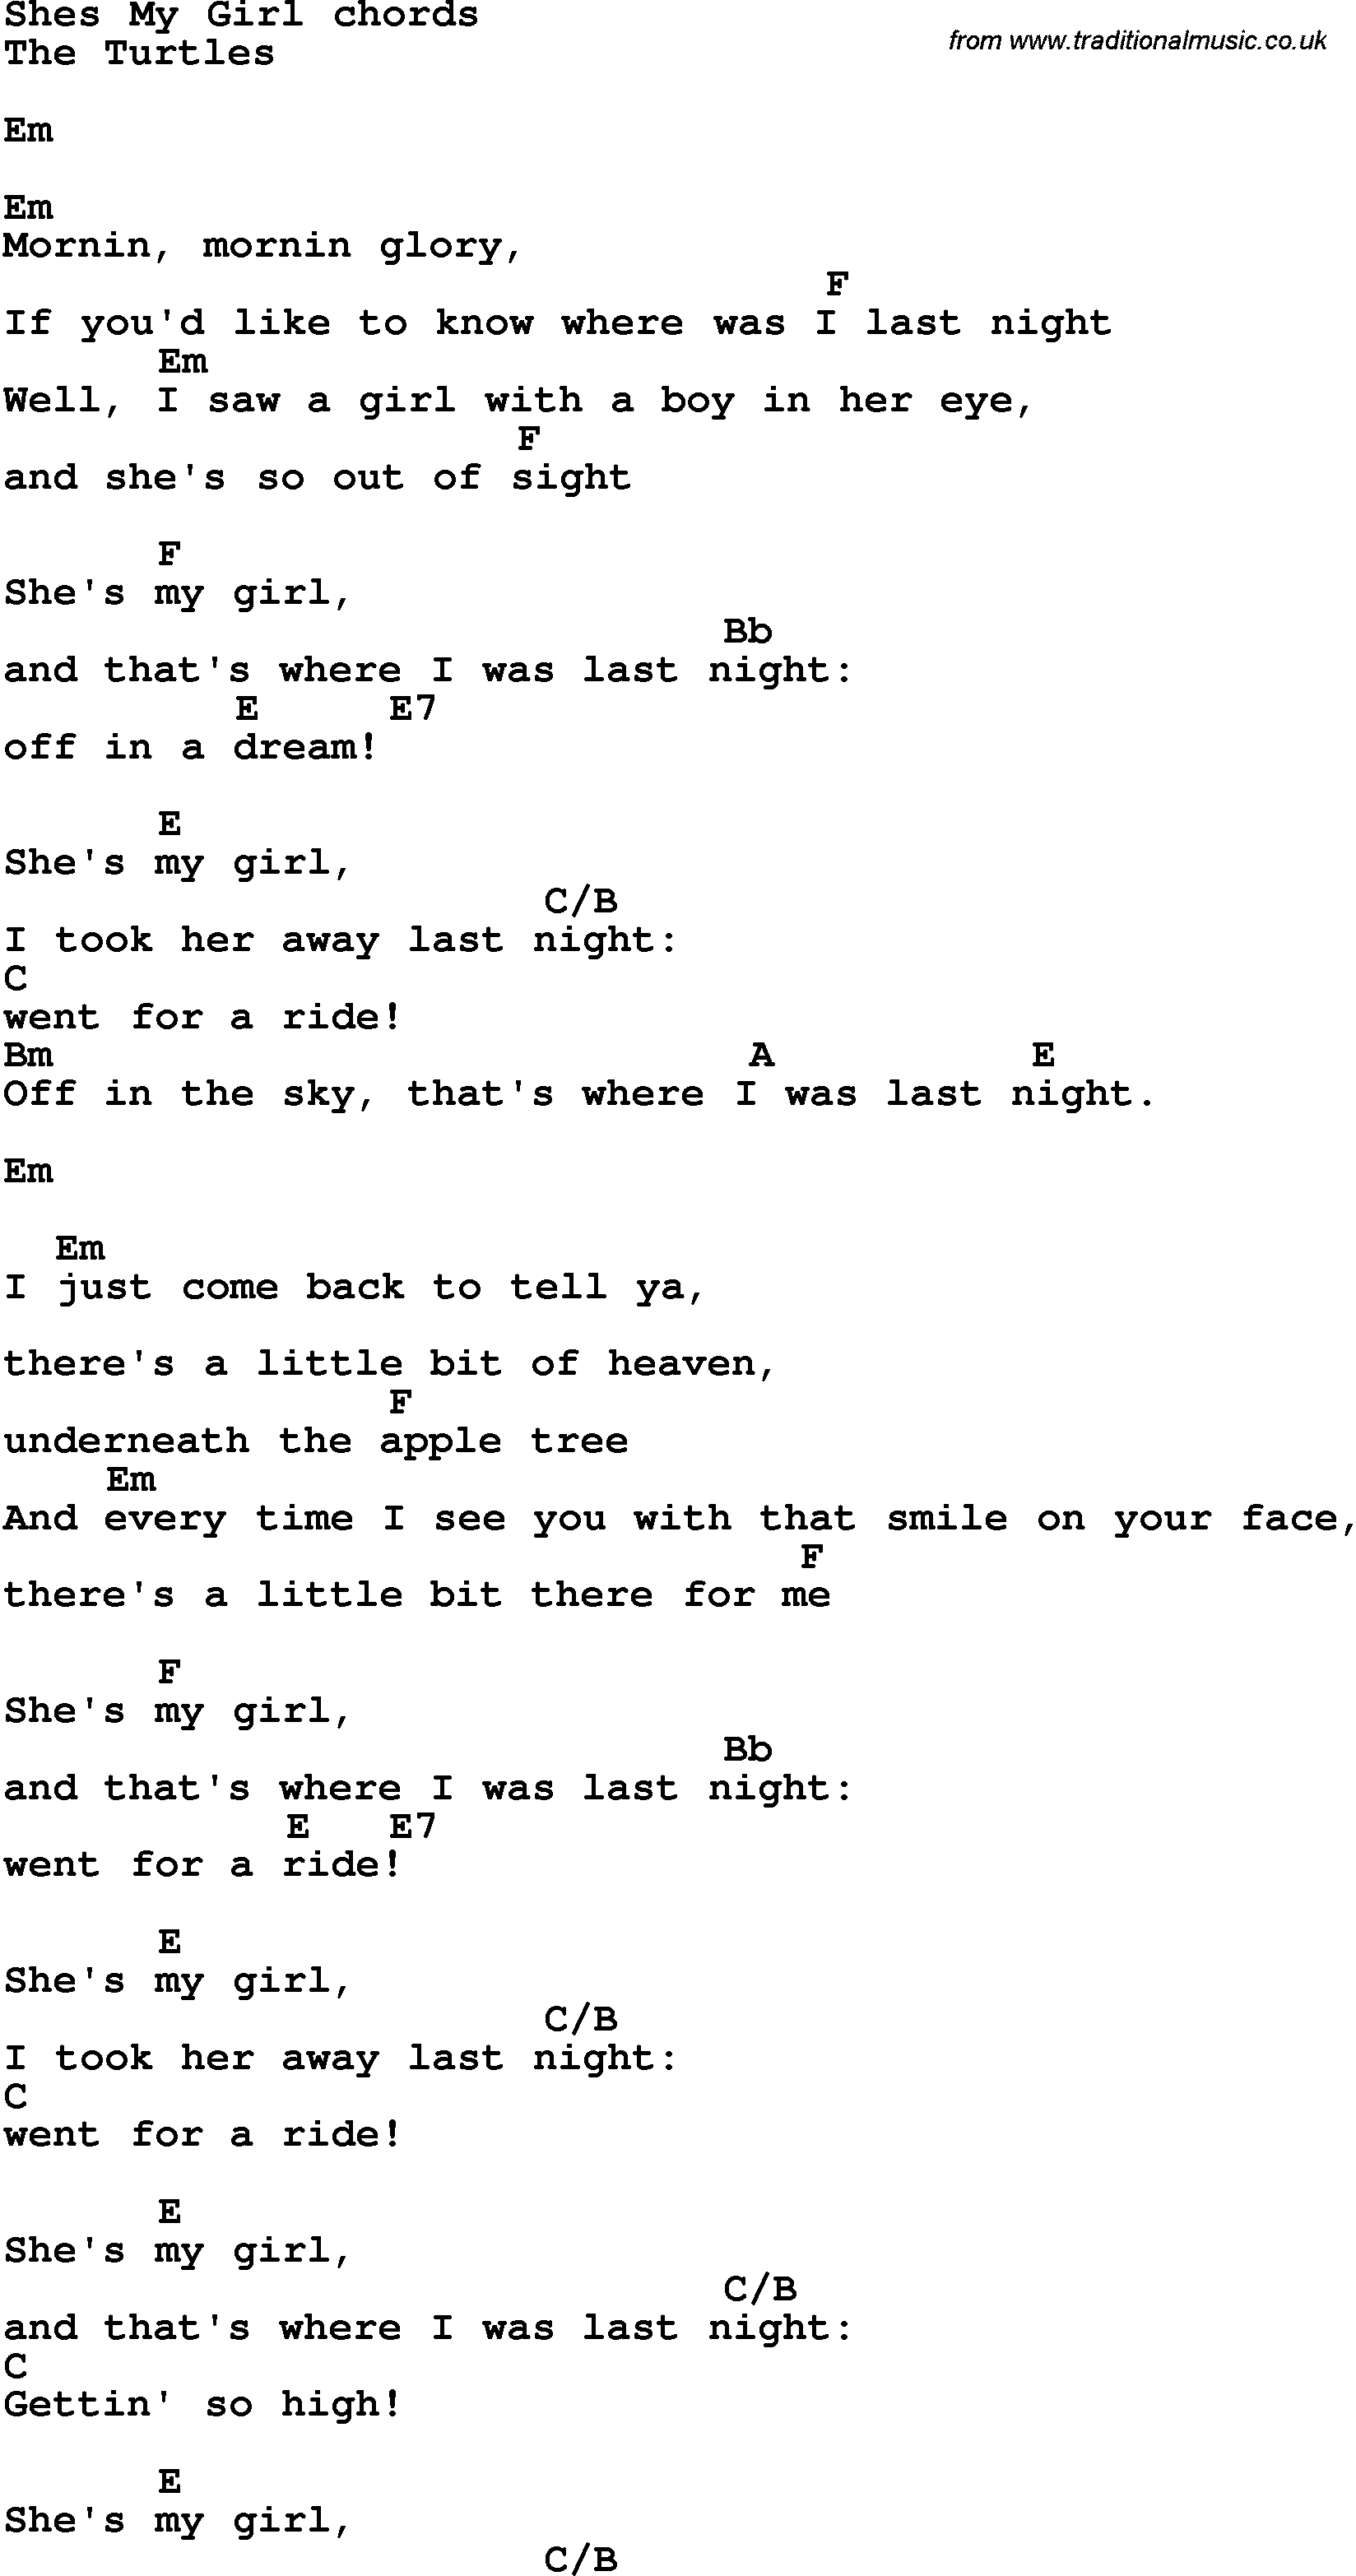 My Girl Chords Song Lyrics With Guitar Chords For Shes My Girl